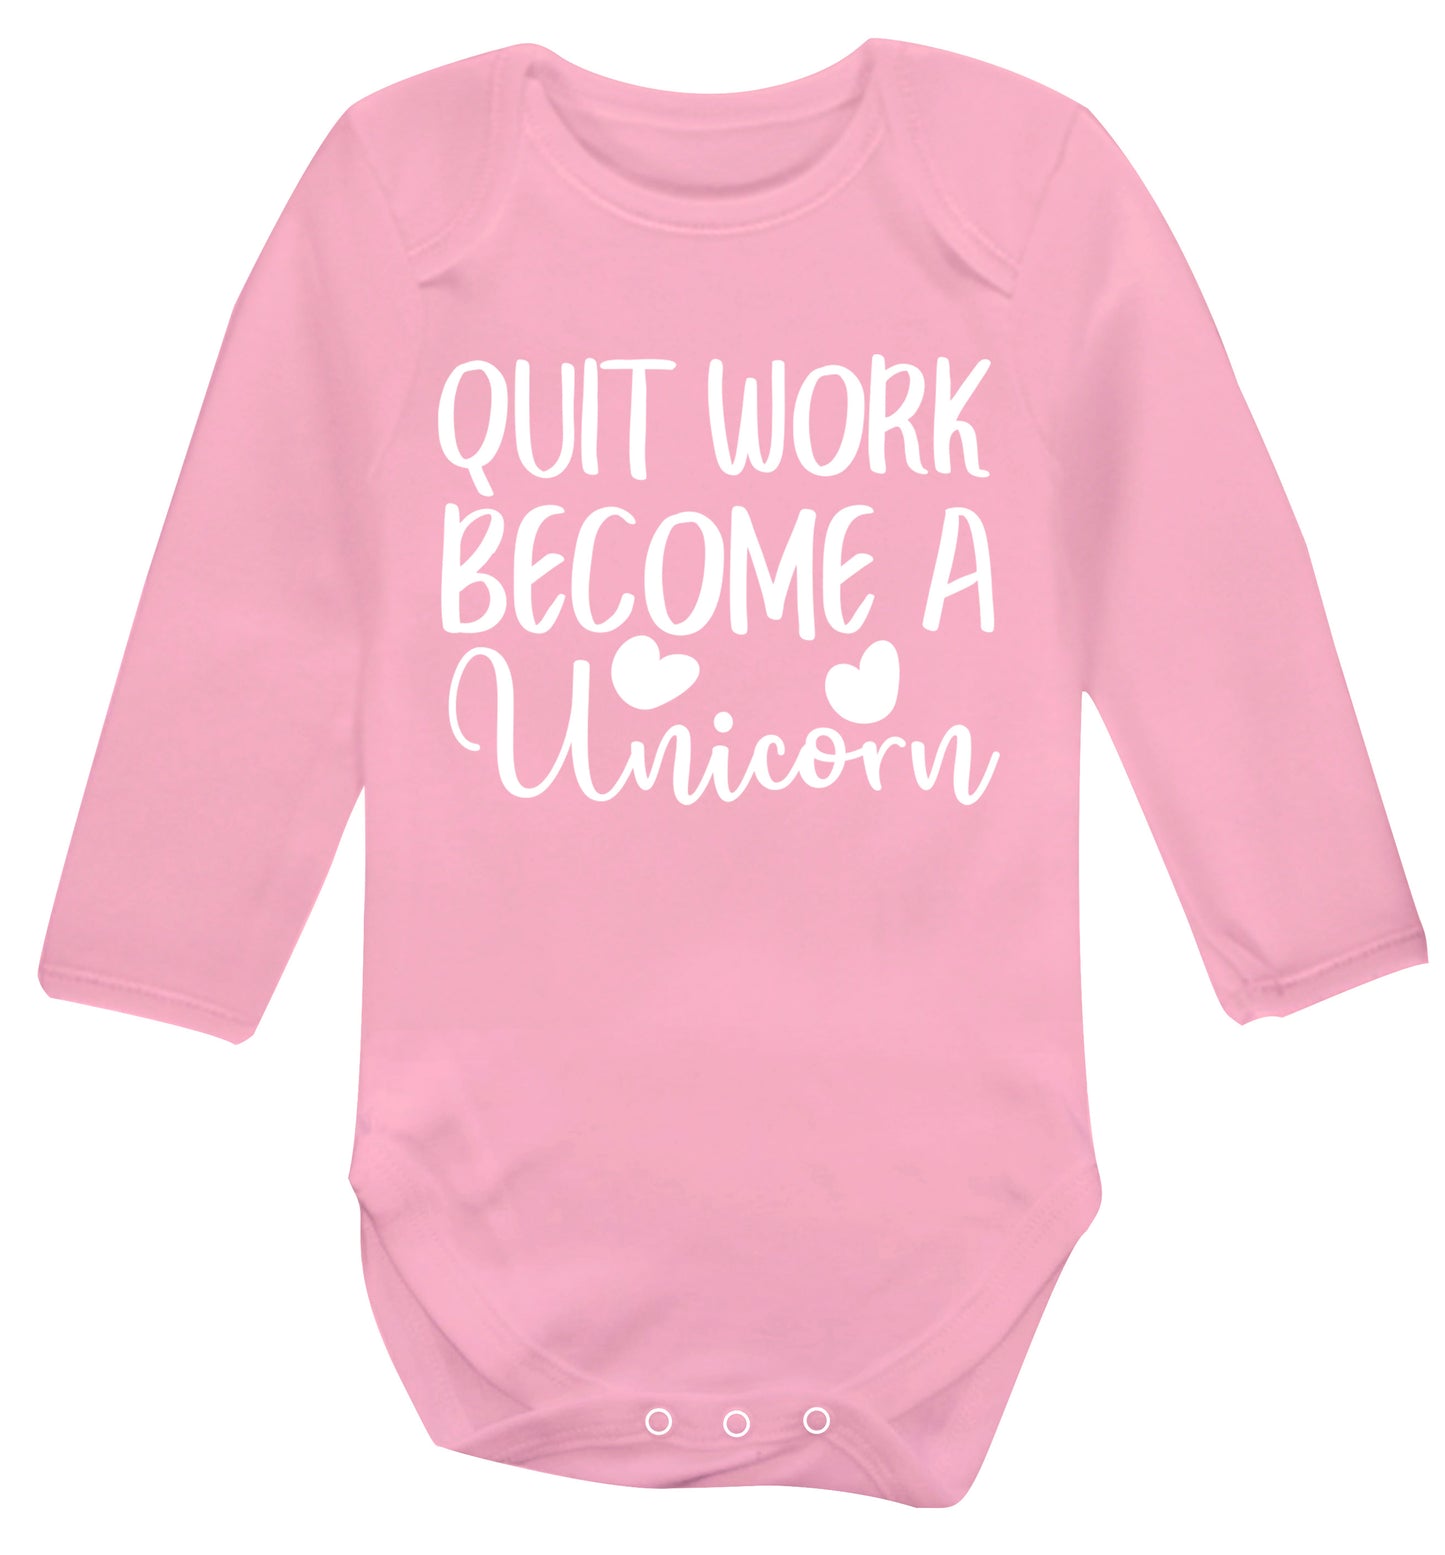 Quit work become a unicorn Baby Vest long sleeved pale pink 6-12 months